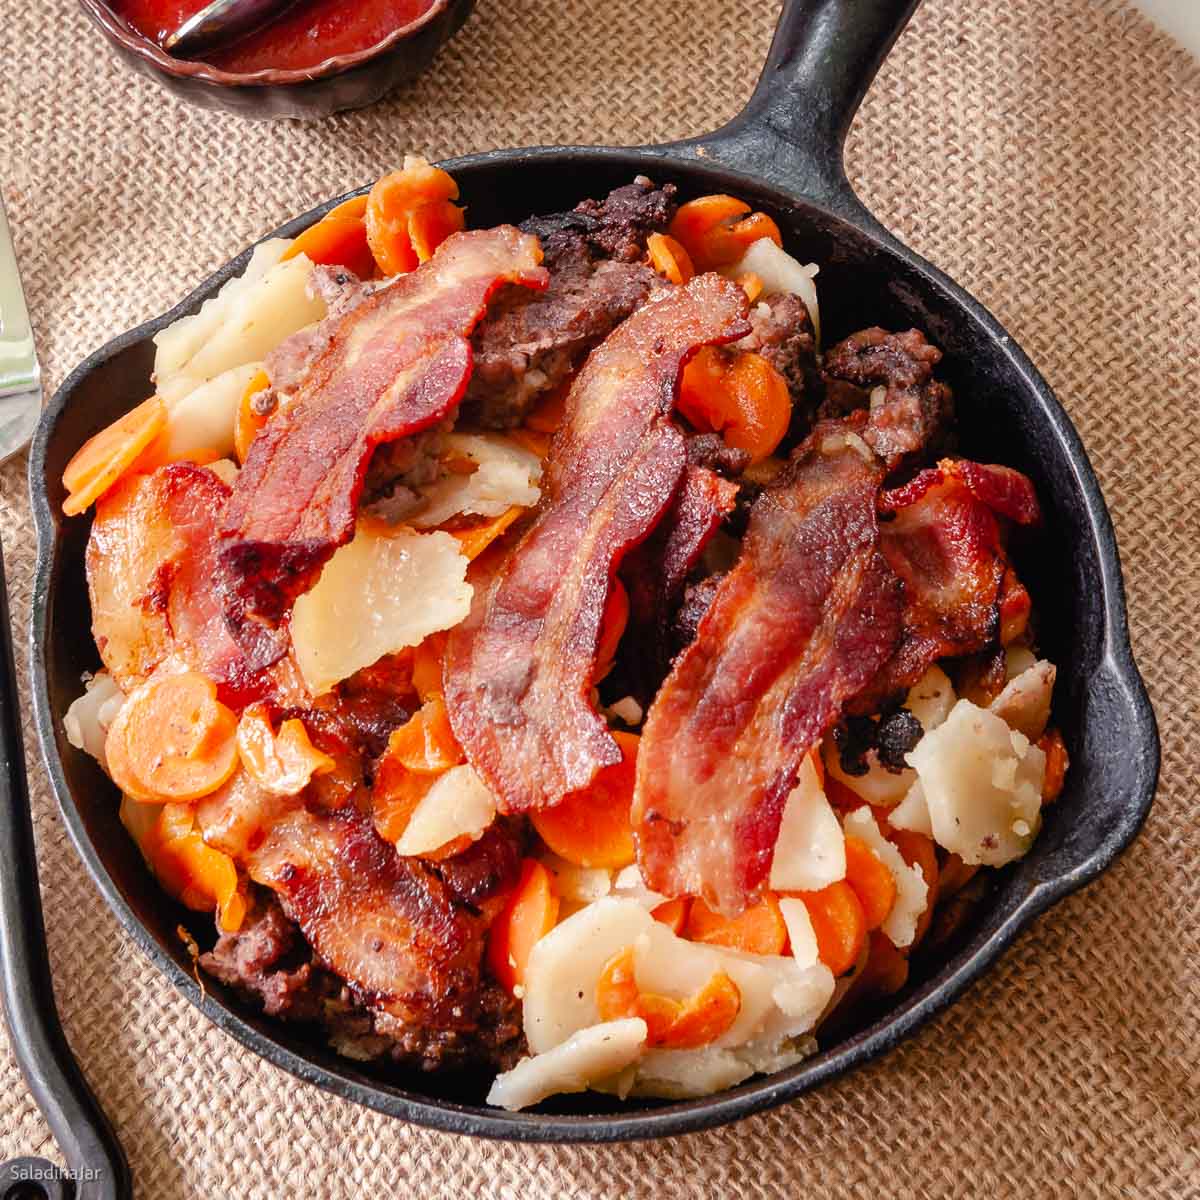 Easy Camping Skillet BBQ Recipe with Ground Meat and Sweet Potatoes